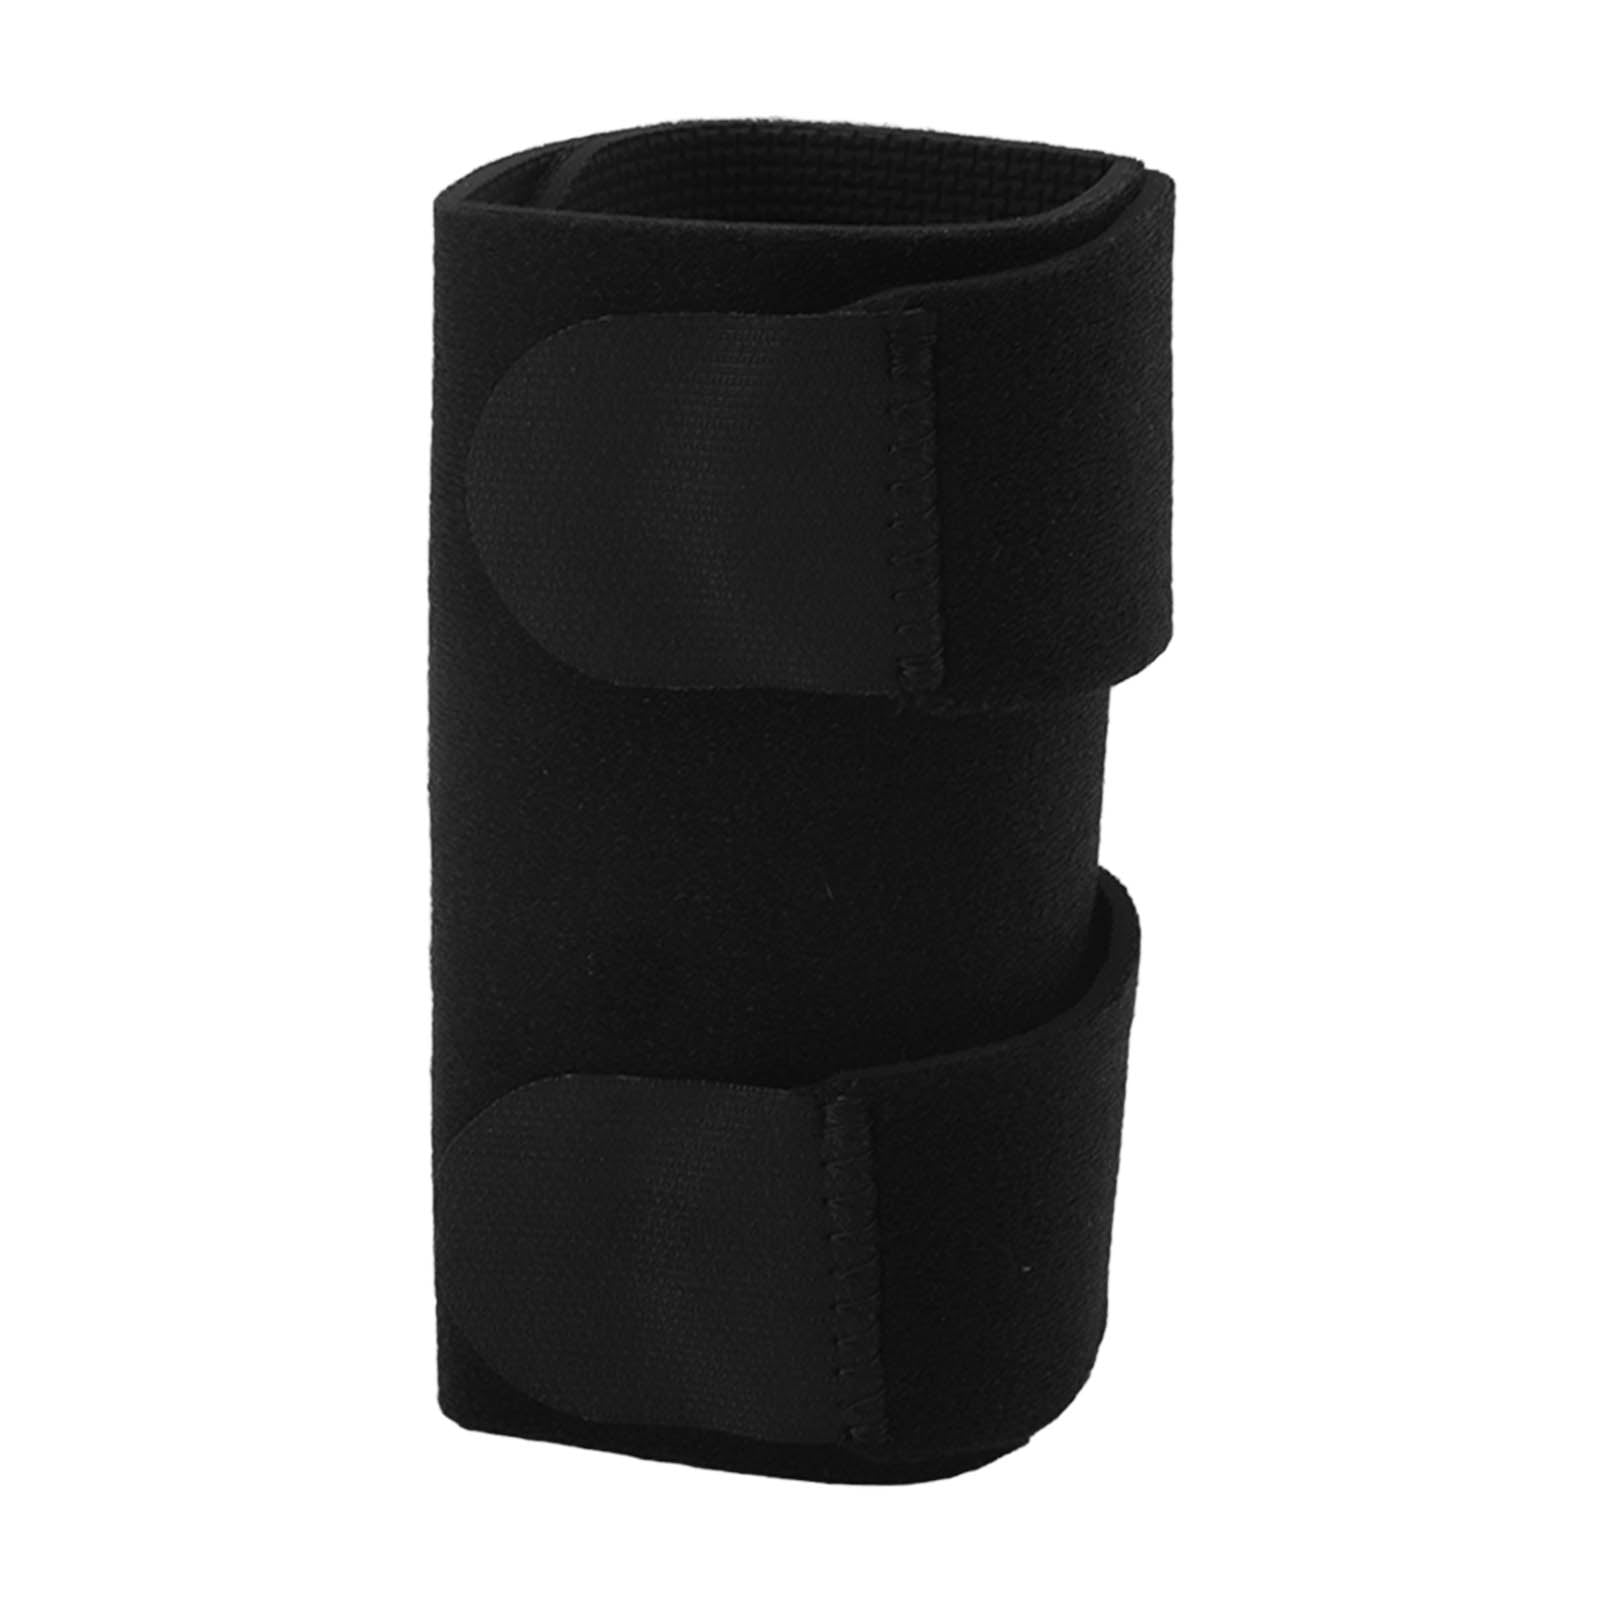 Thigh Support Compression Sleeve Brace Hamstring Wrap Groin Quad Leg  Bandage muscle strain protection